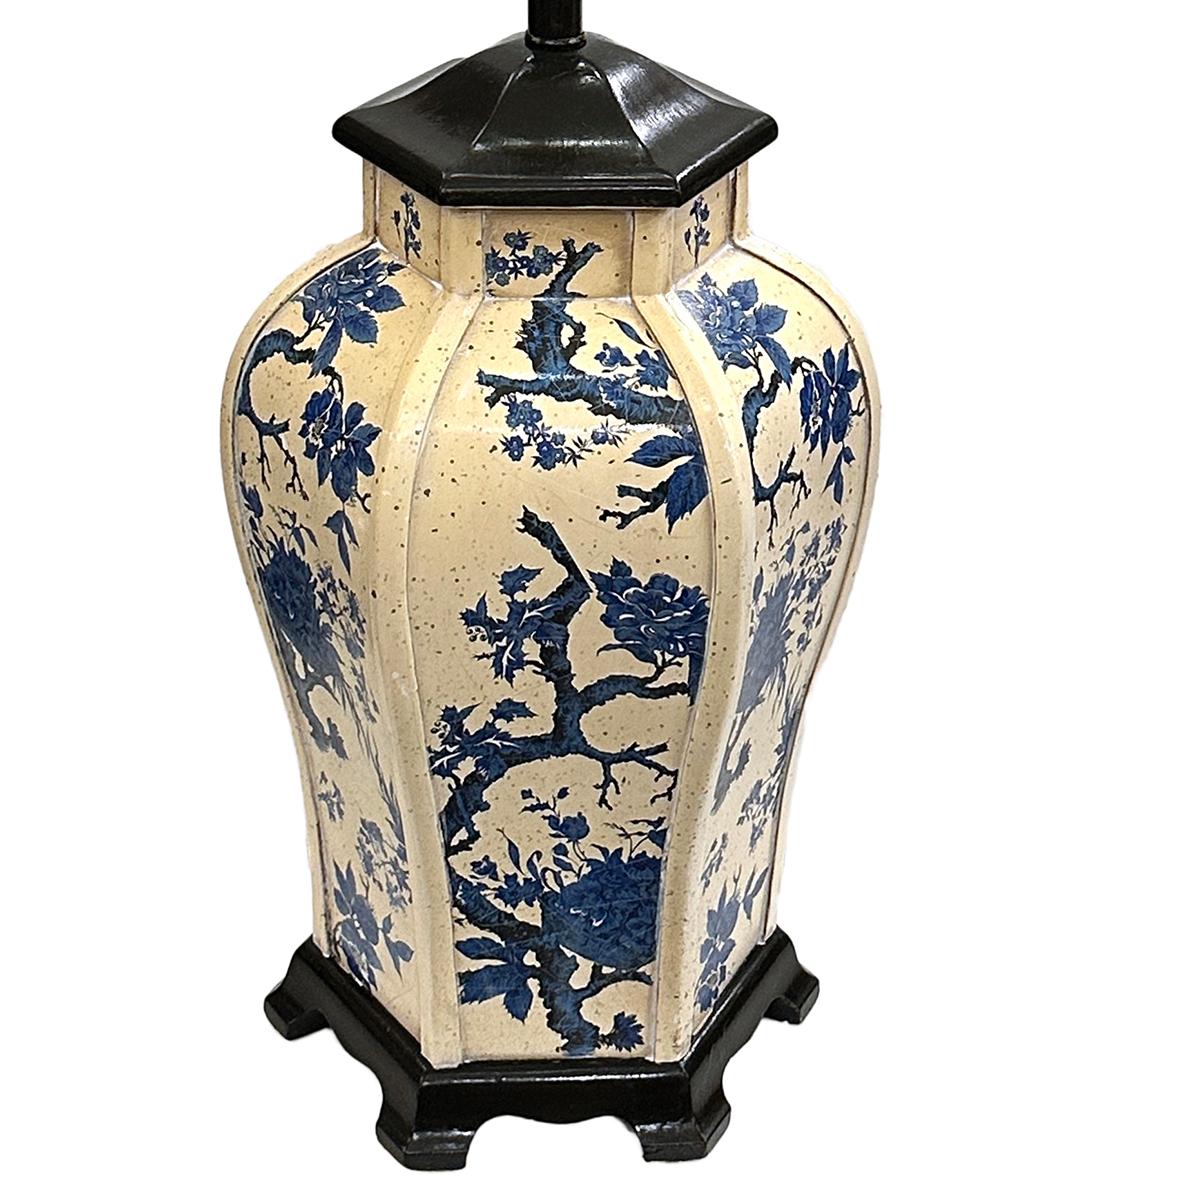 An English circa 1950's Chinoiserie lamp with floral motif.

Measurements:
Height of body: 19